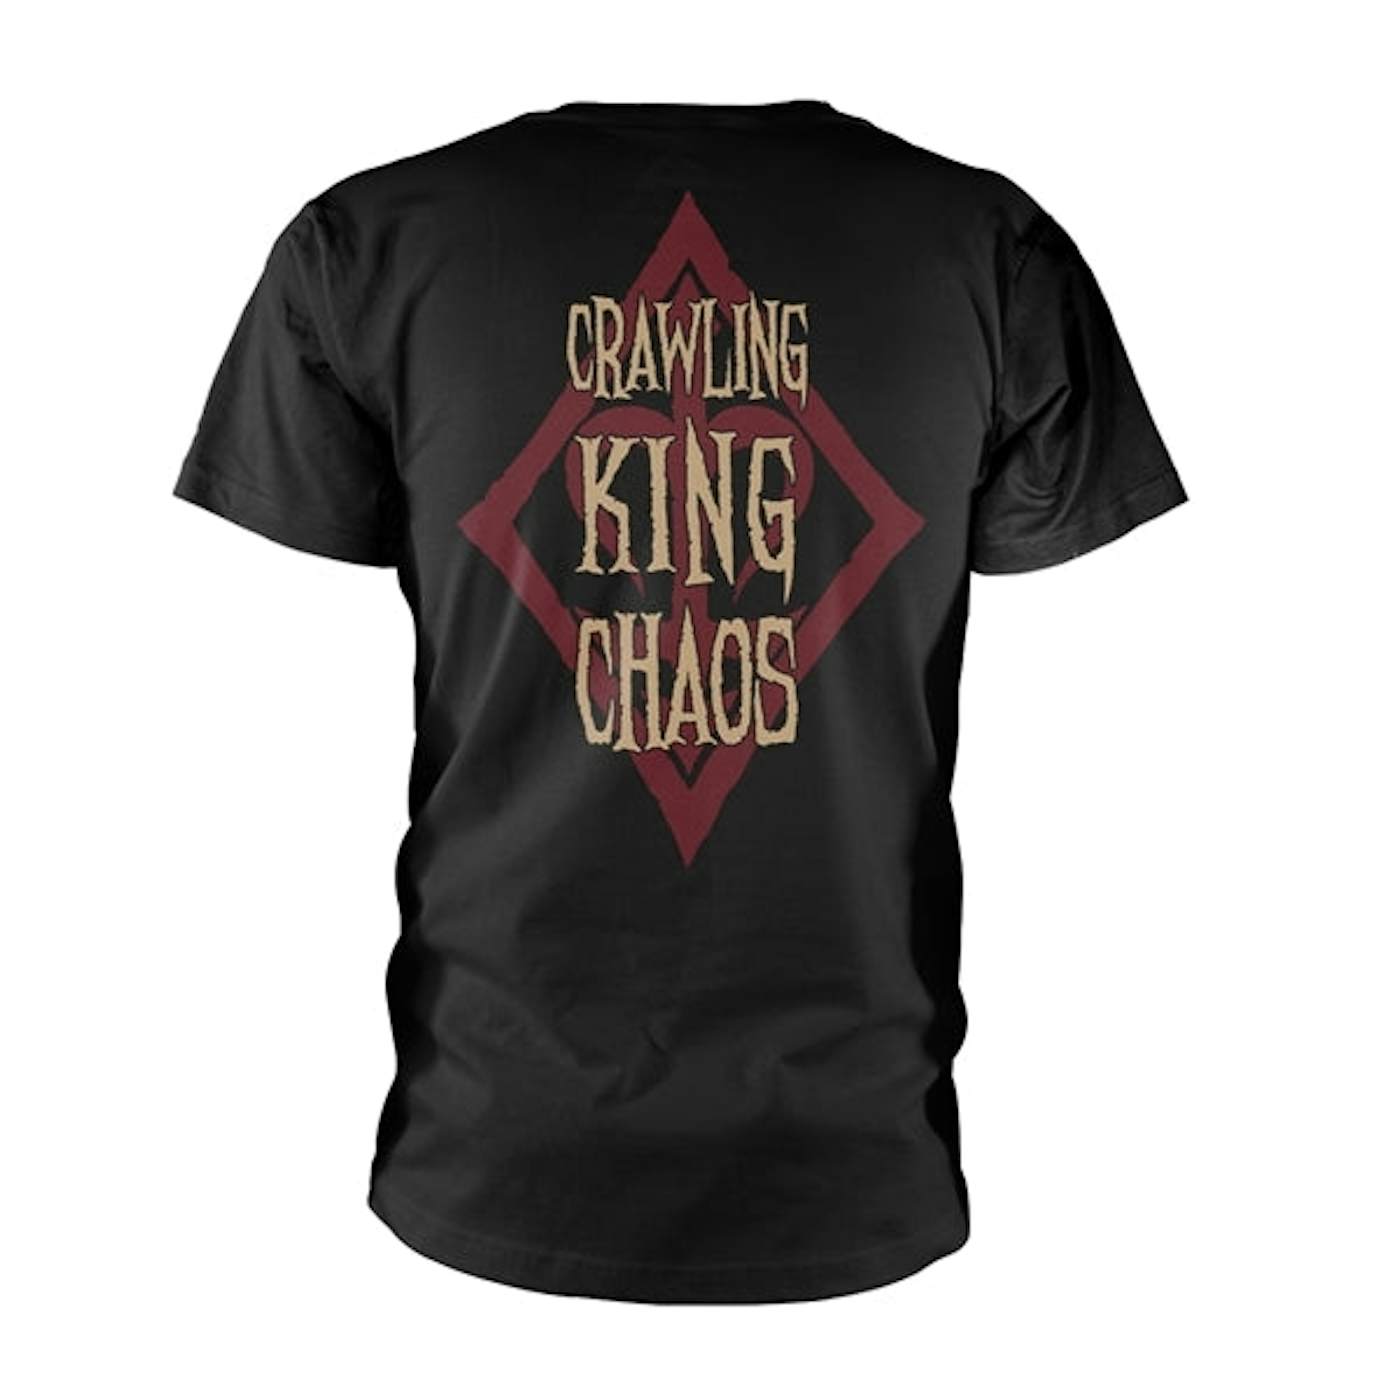 Cradle Of Filth T-Shirt - Crawling King Chaos (All Existence)